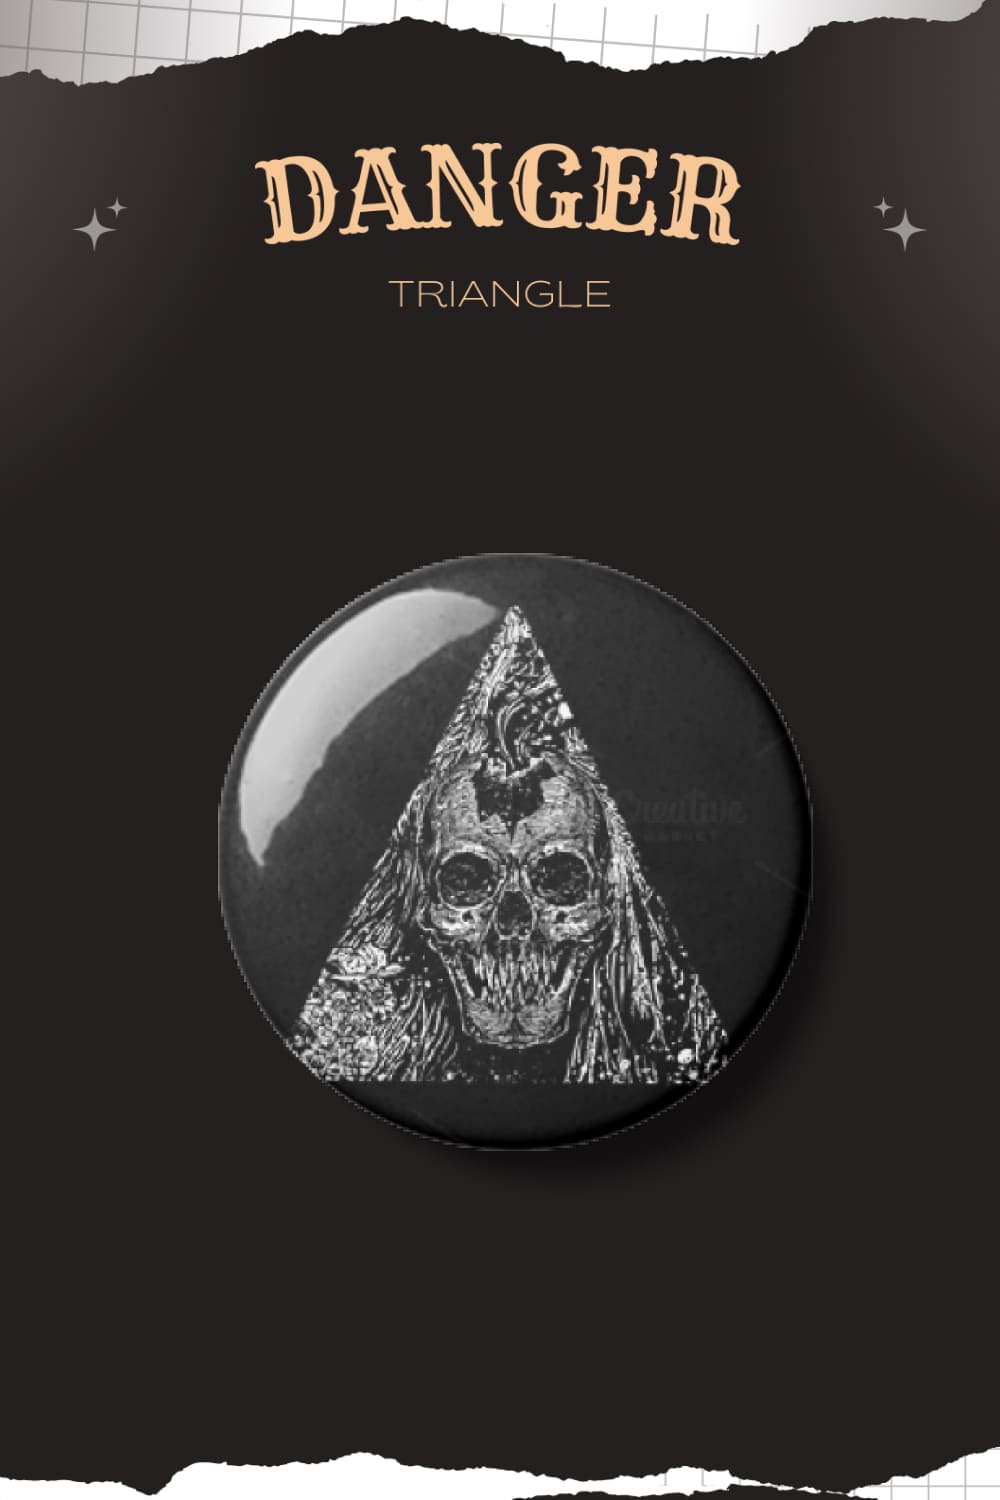 Danger triangle with skull pattern on black round icon.